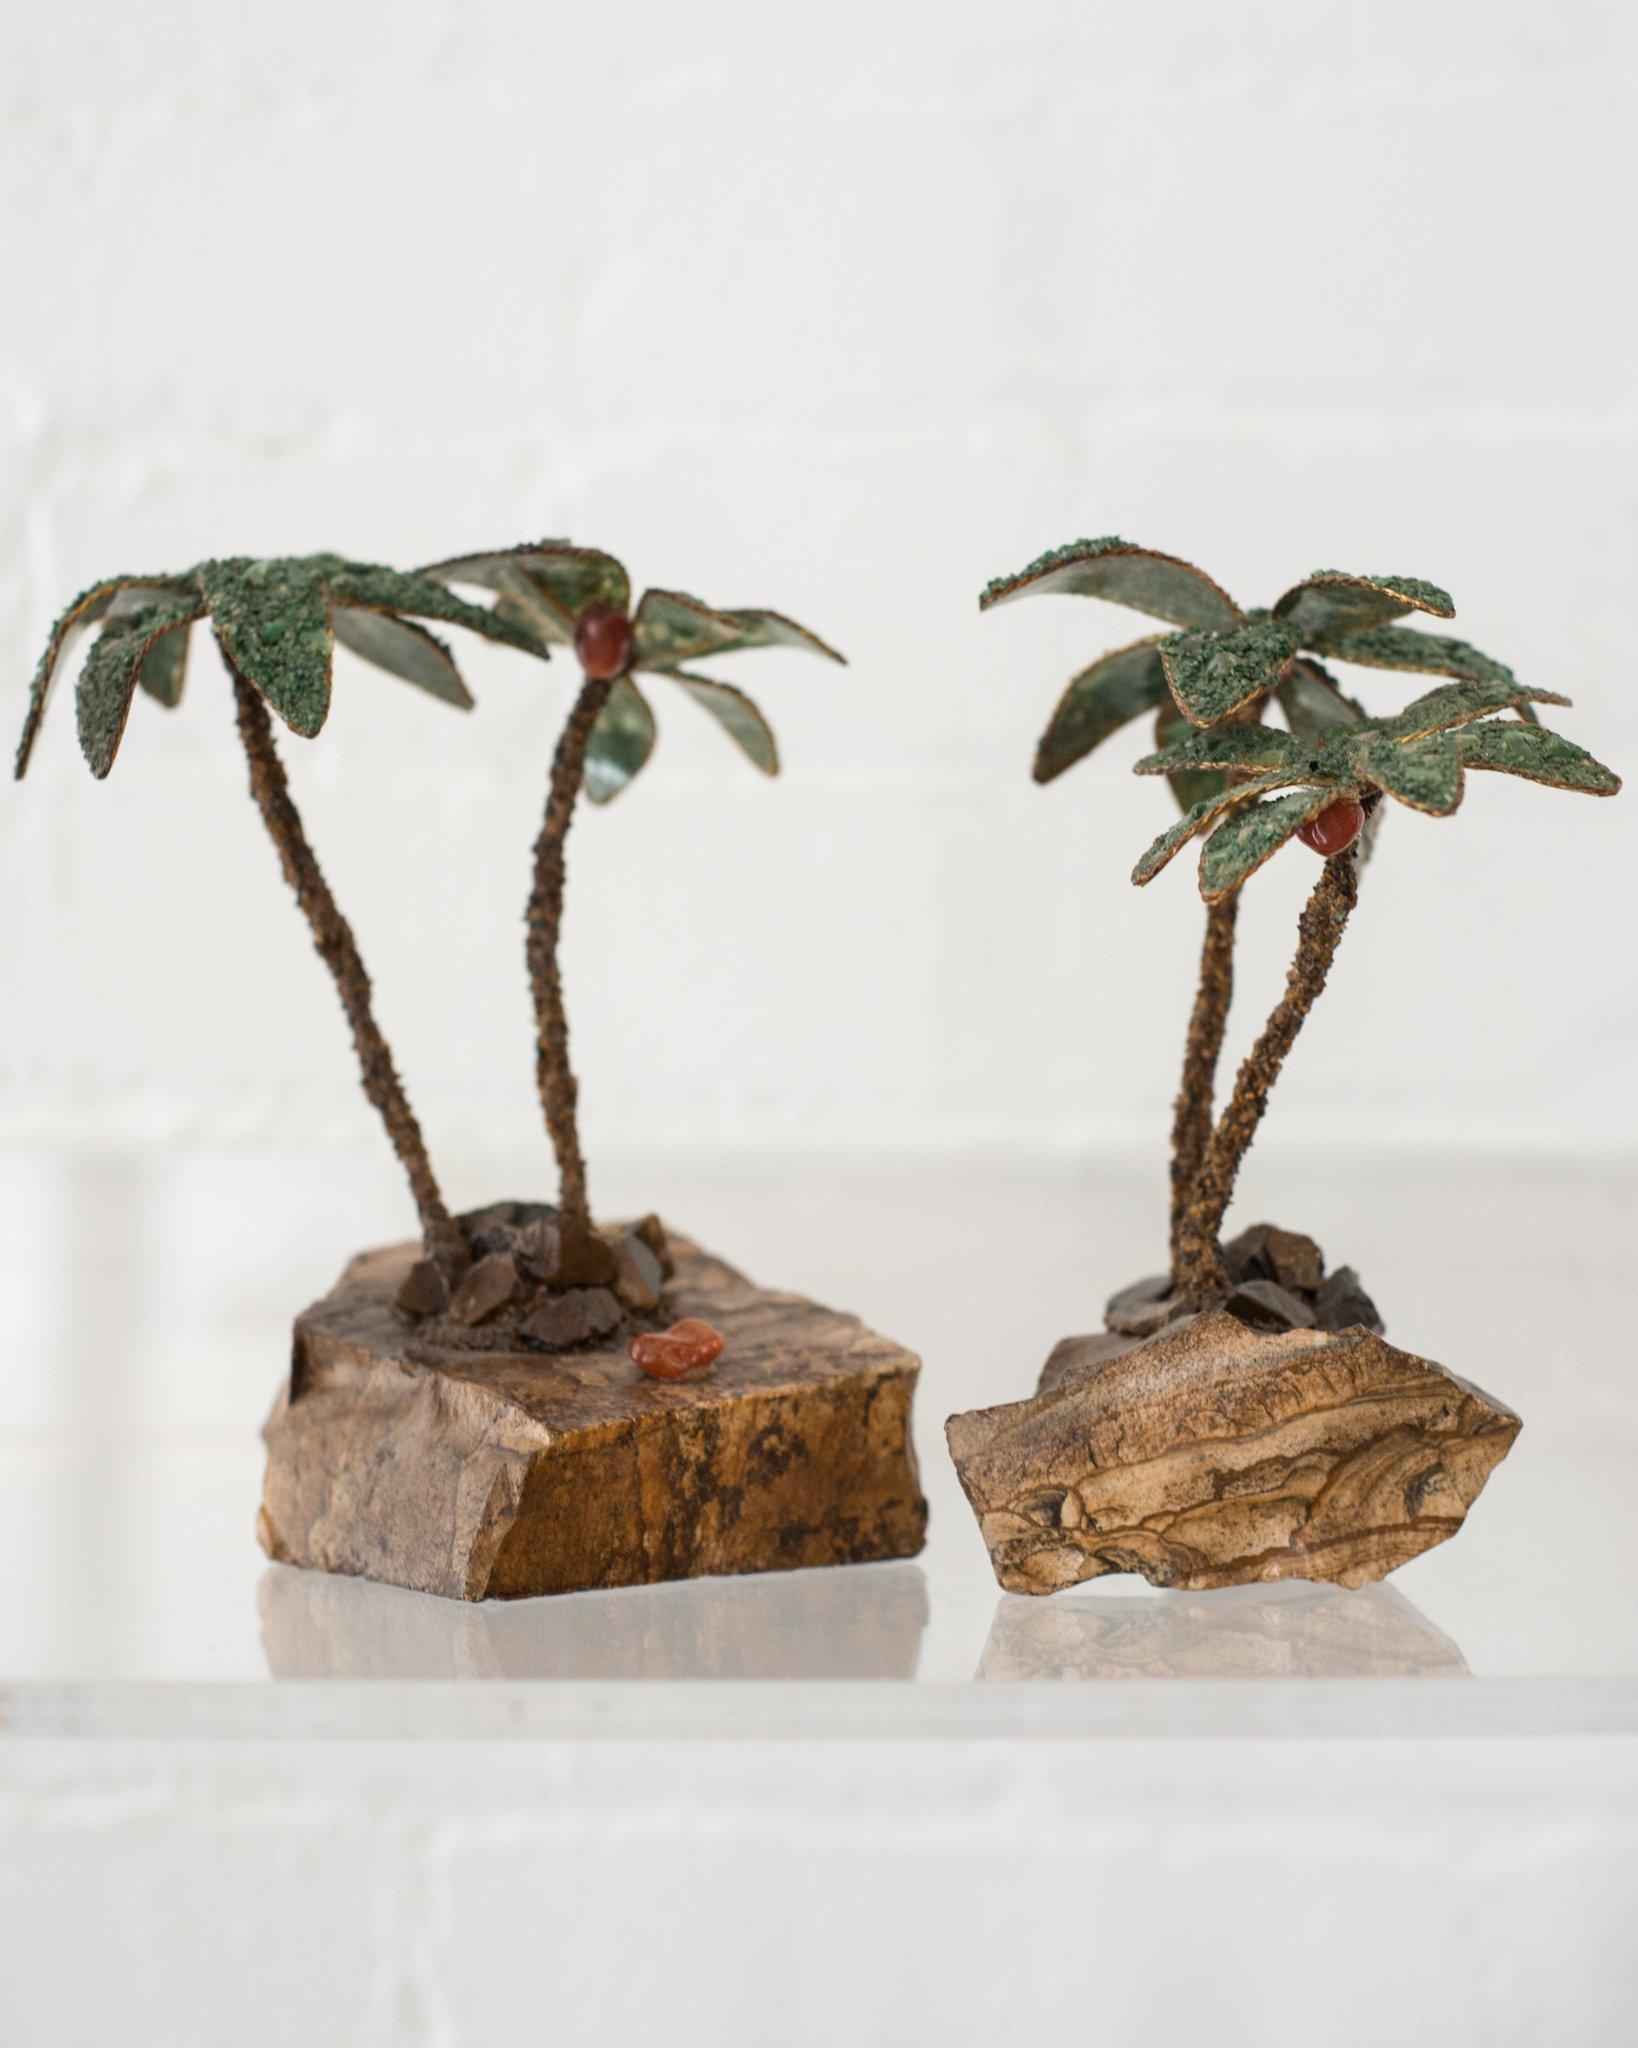 This unusual pair of semi-precious palm trees consist of Tiger's Eye trunks and Malachite leaves. These trees can be used as bookends or can remain as decorative items.